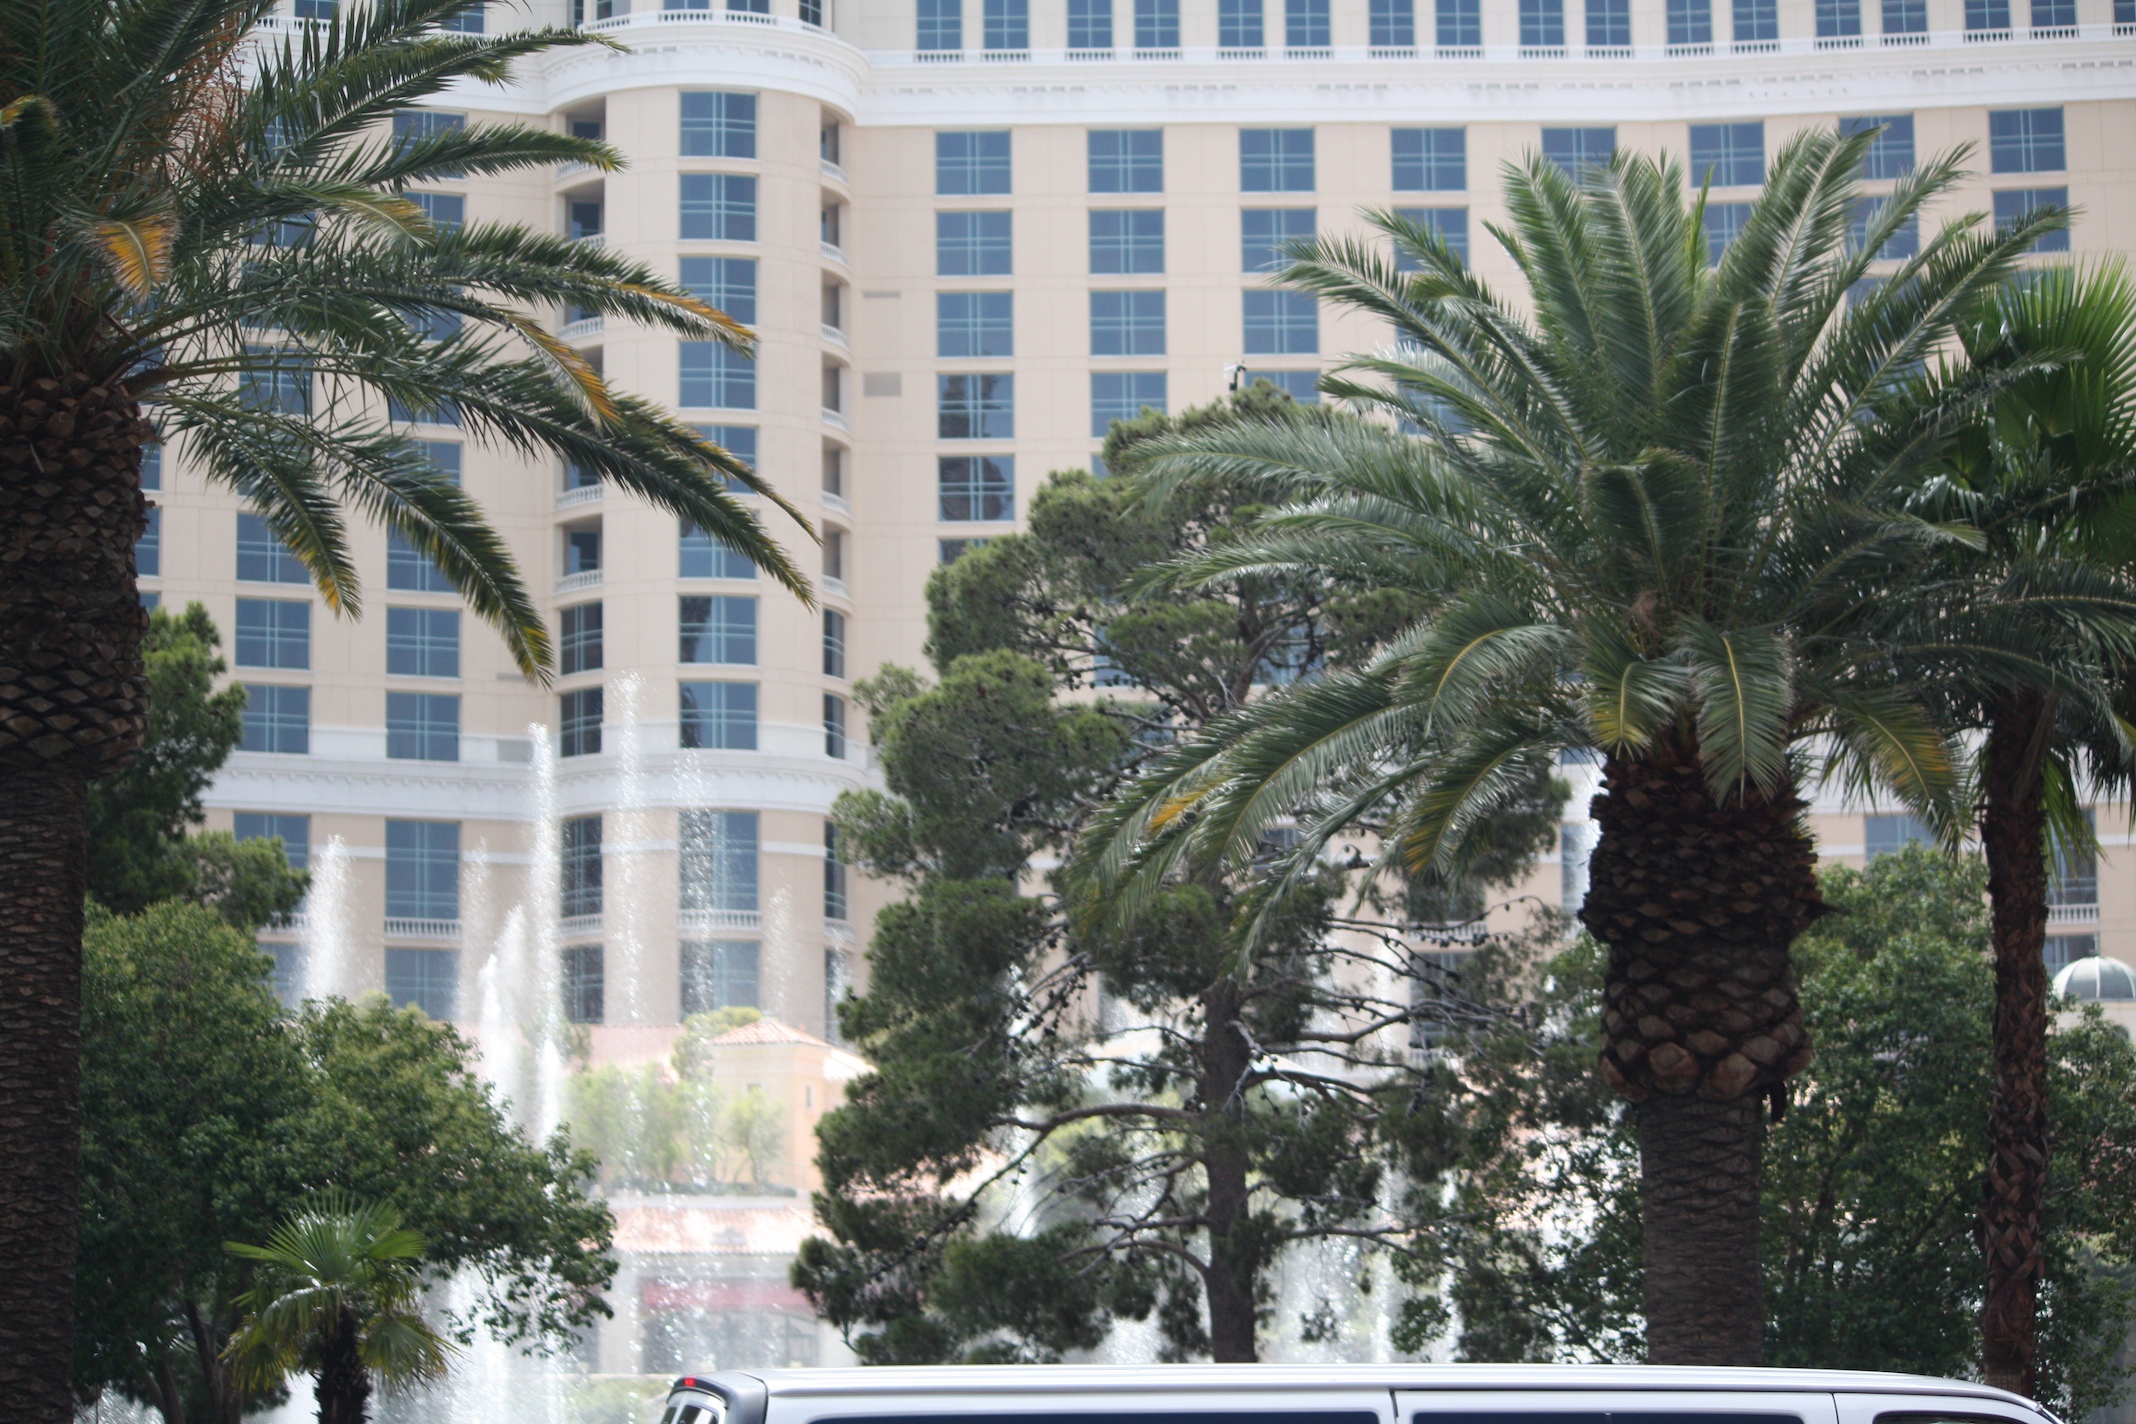 a bus parked in front of tall buildings and palm trees